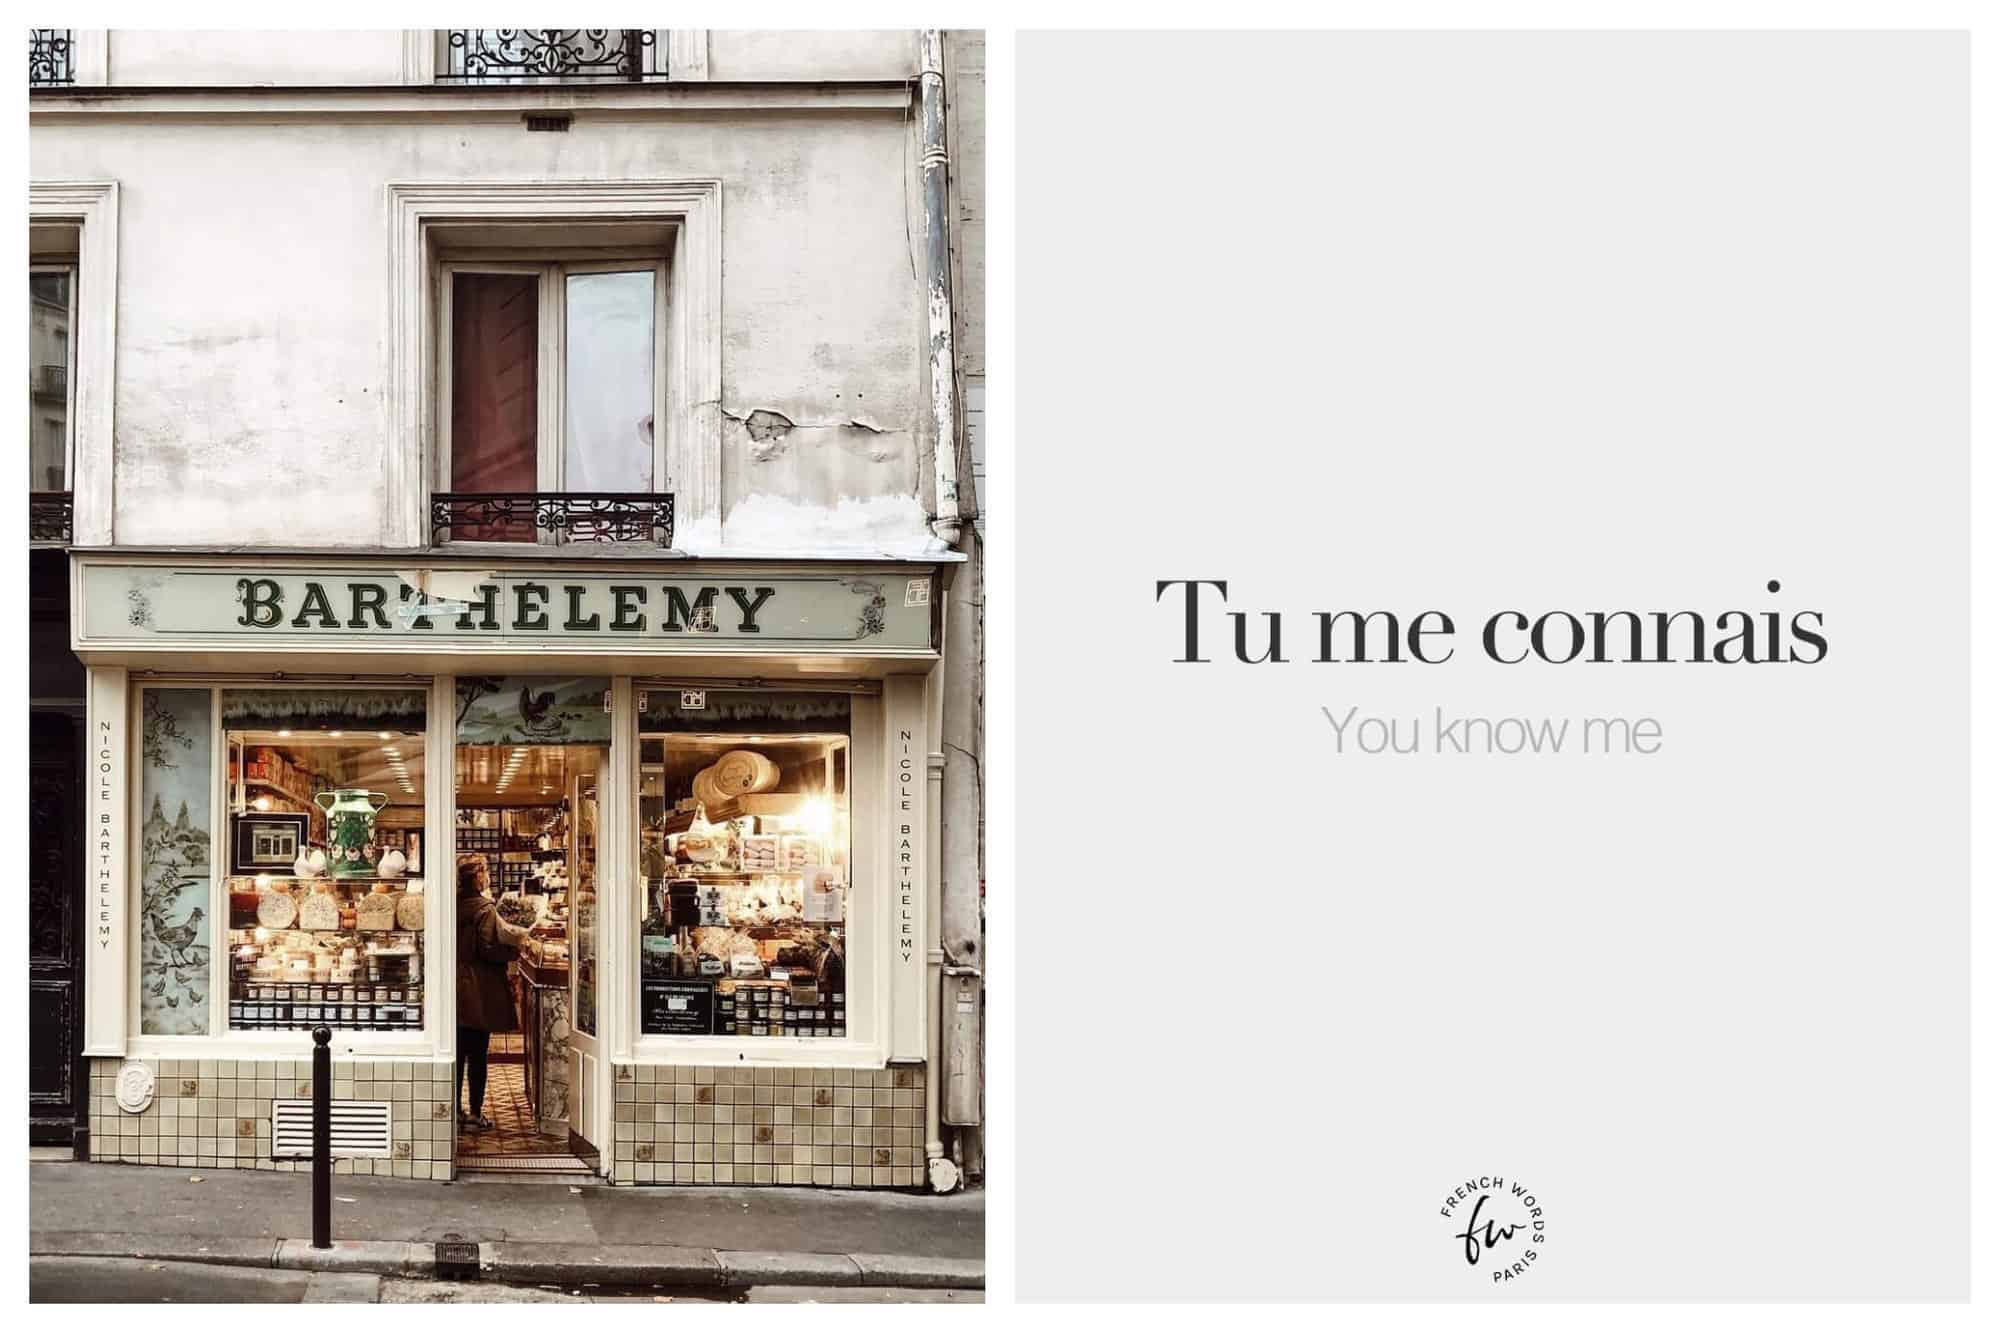 Left: a photo of the storefront of Barthelemy, a fromagerie in Paris. Right: text of both french and english: tu me connais / you know me.